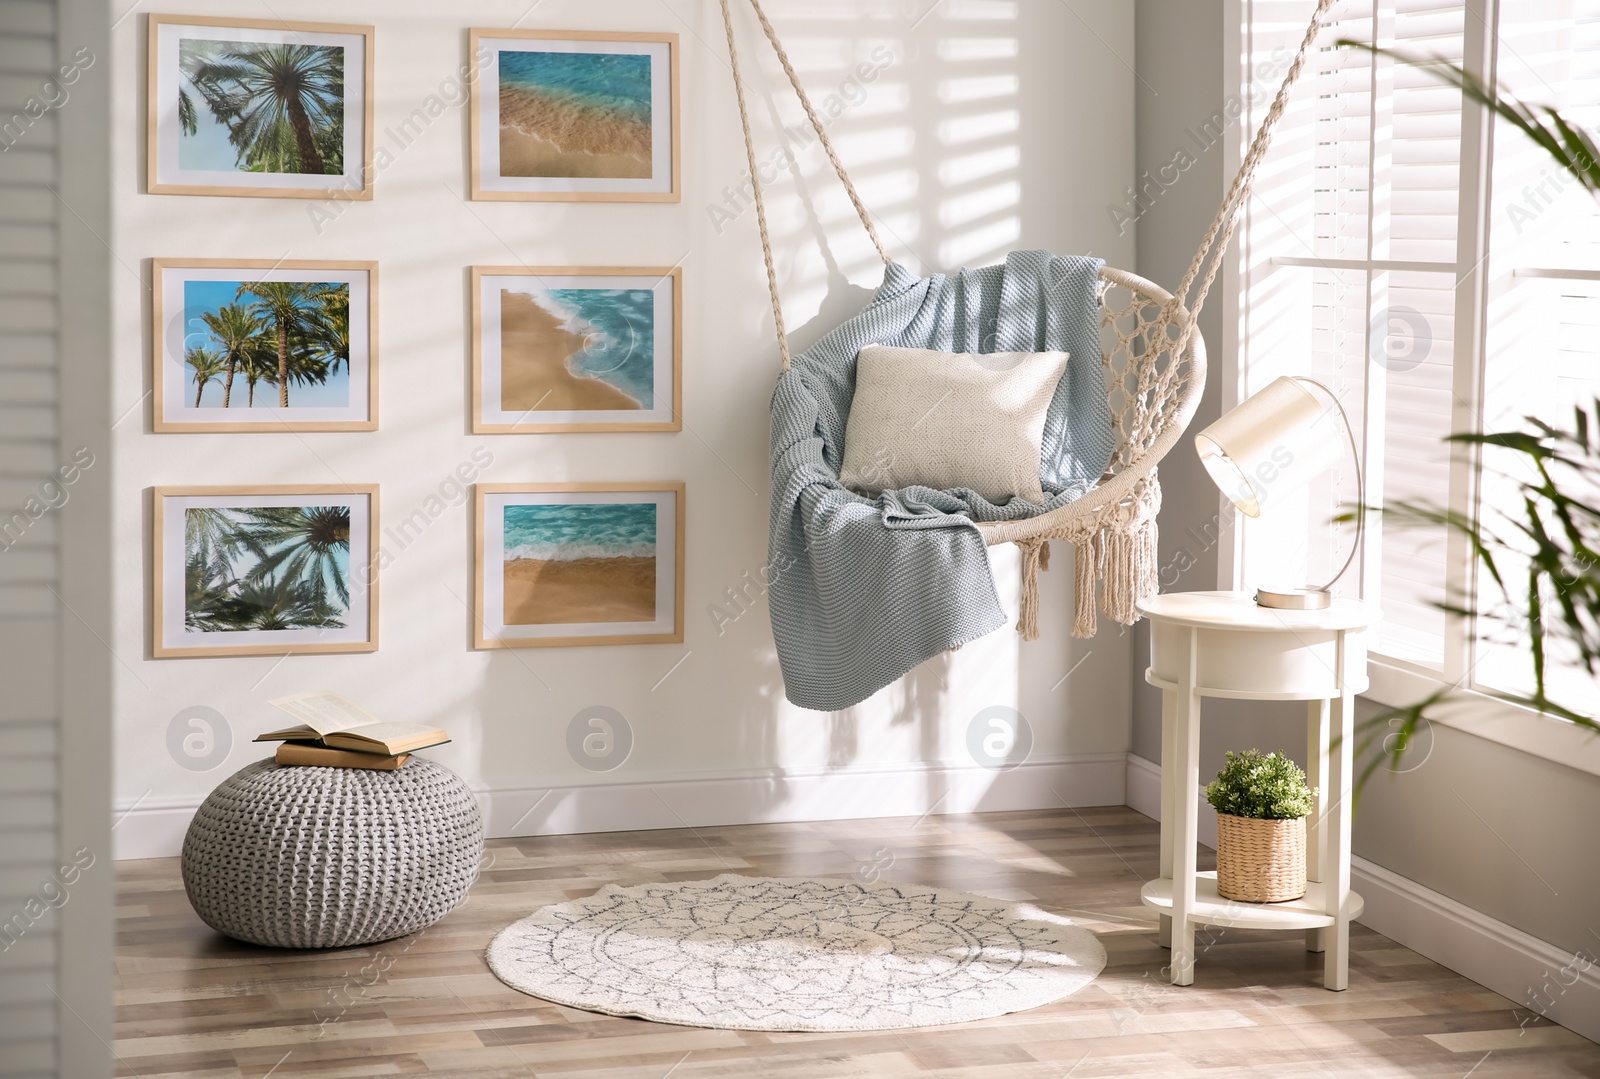 Photo of Stylish room interior with artworks and hanging chair